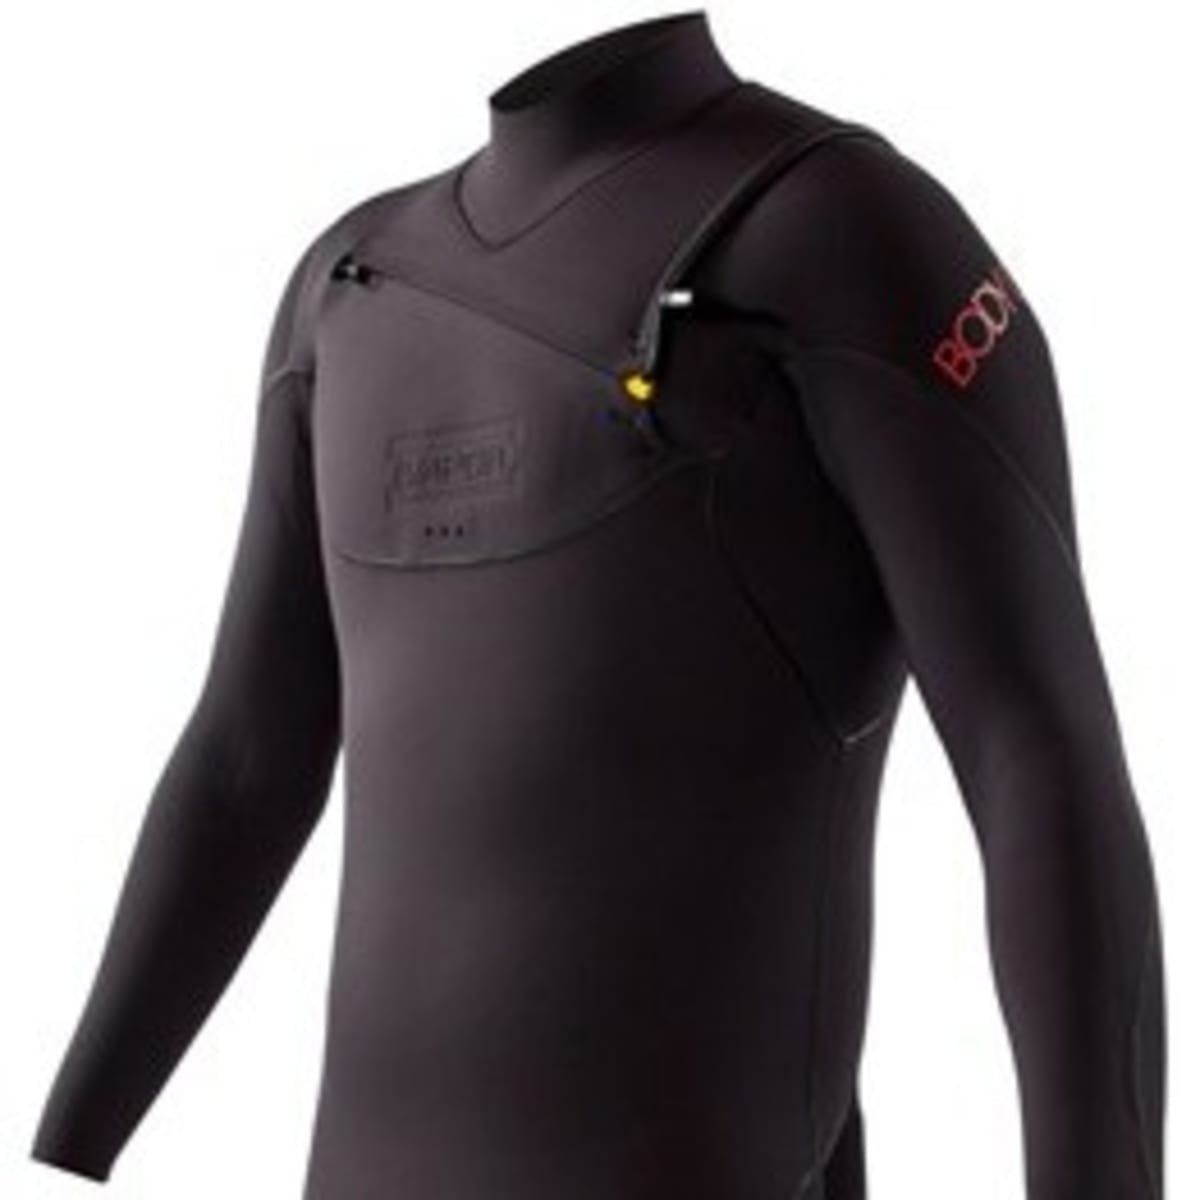 Body Glove's new Red Cell wetsuit turns infrared light to heat